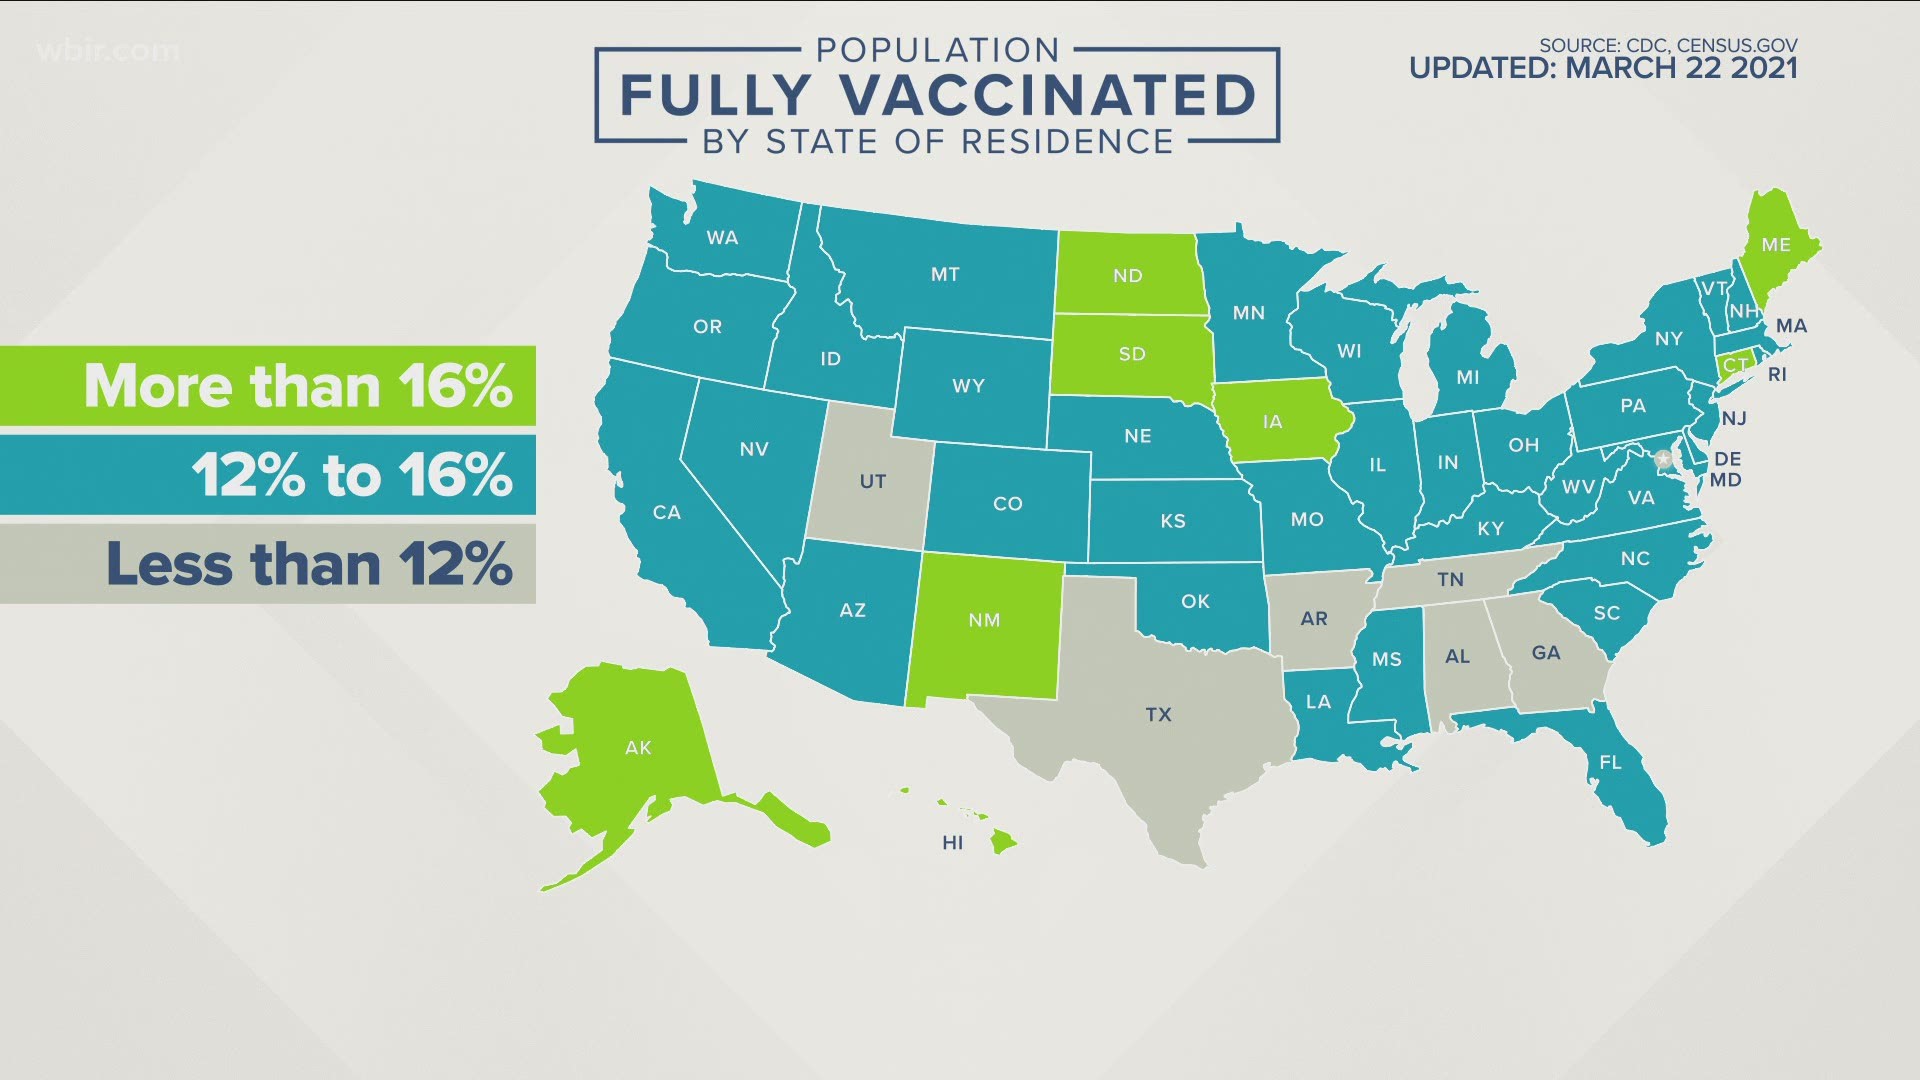 In Tennessee, around 1 in 9 people have been fully vaccinated against COVID-19. Nationally, around 1 in 6 people have been fully vaccinated.